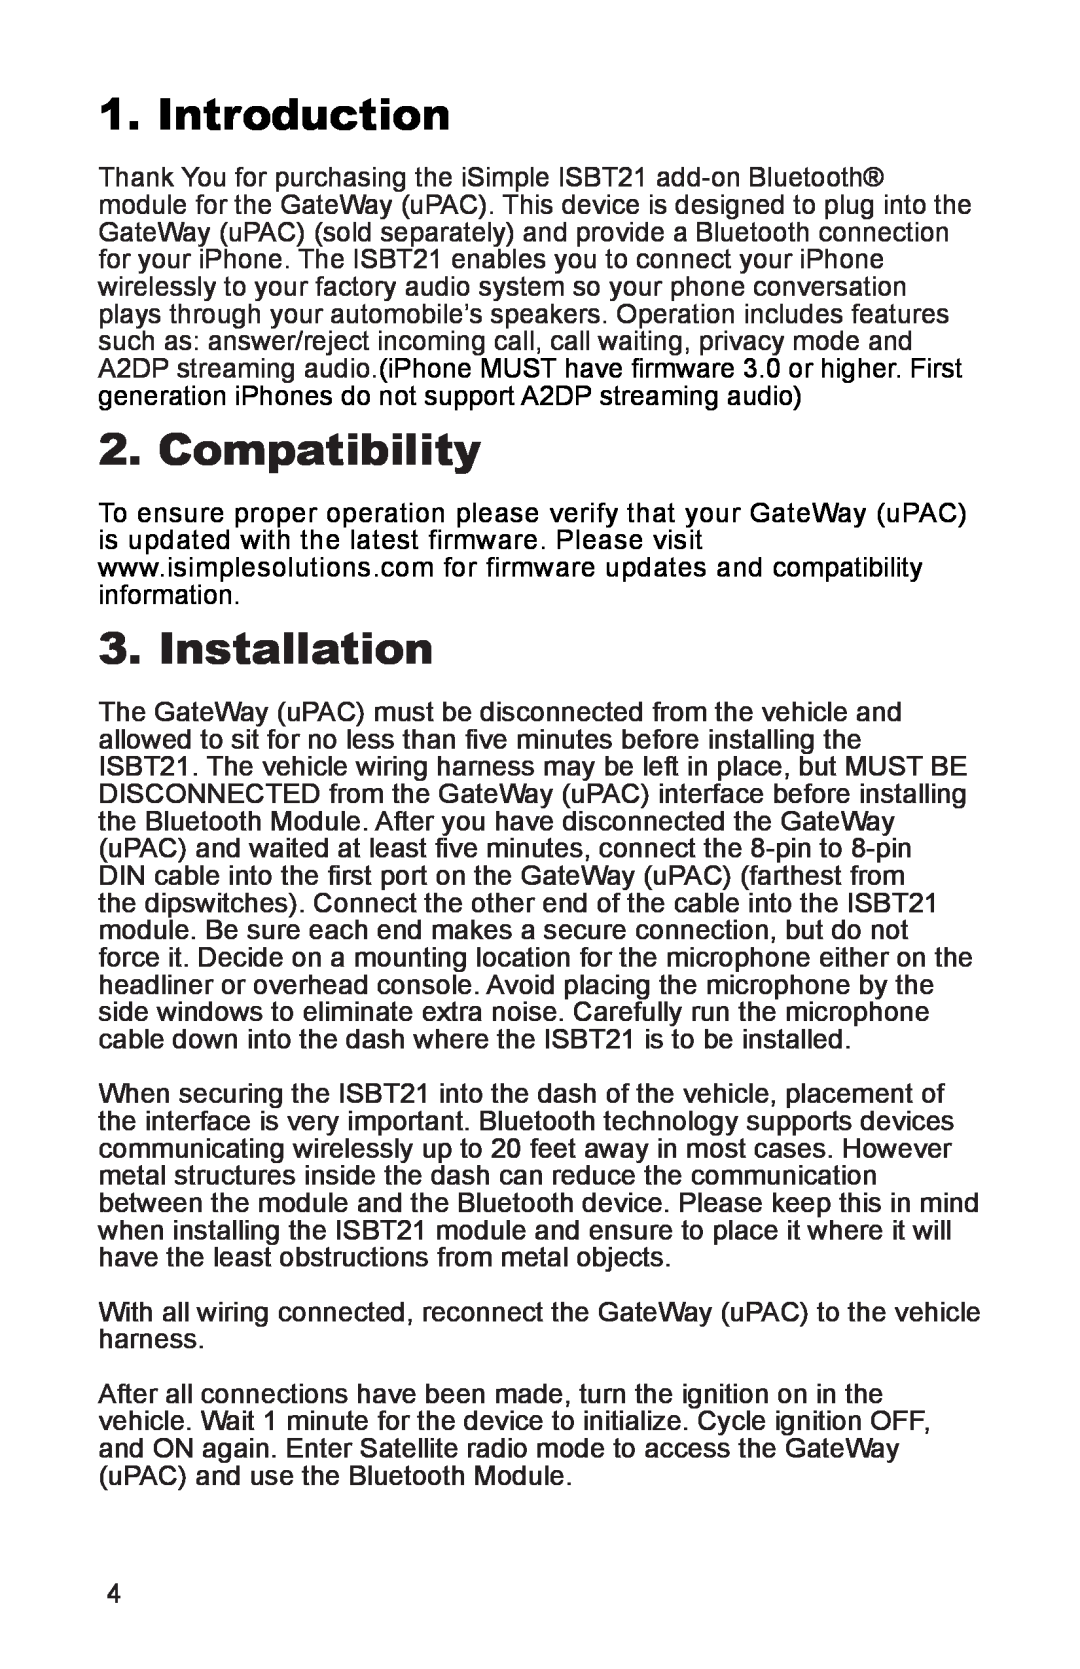 iSimple ISBT21 owner manual Introduction, Compatibility, Installation 